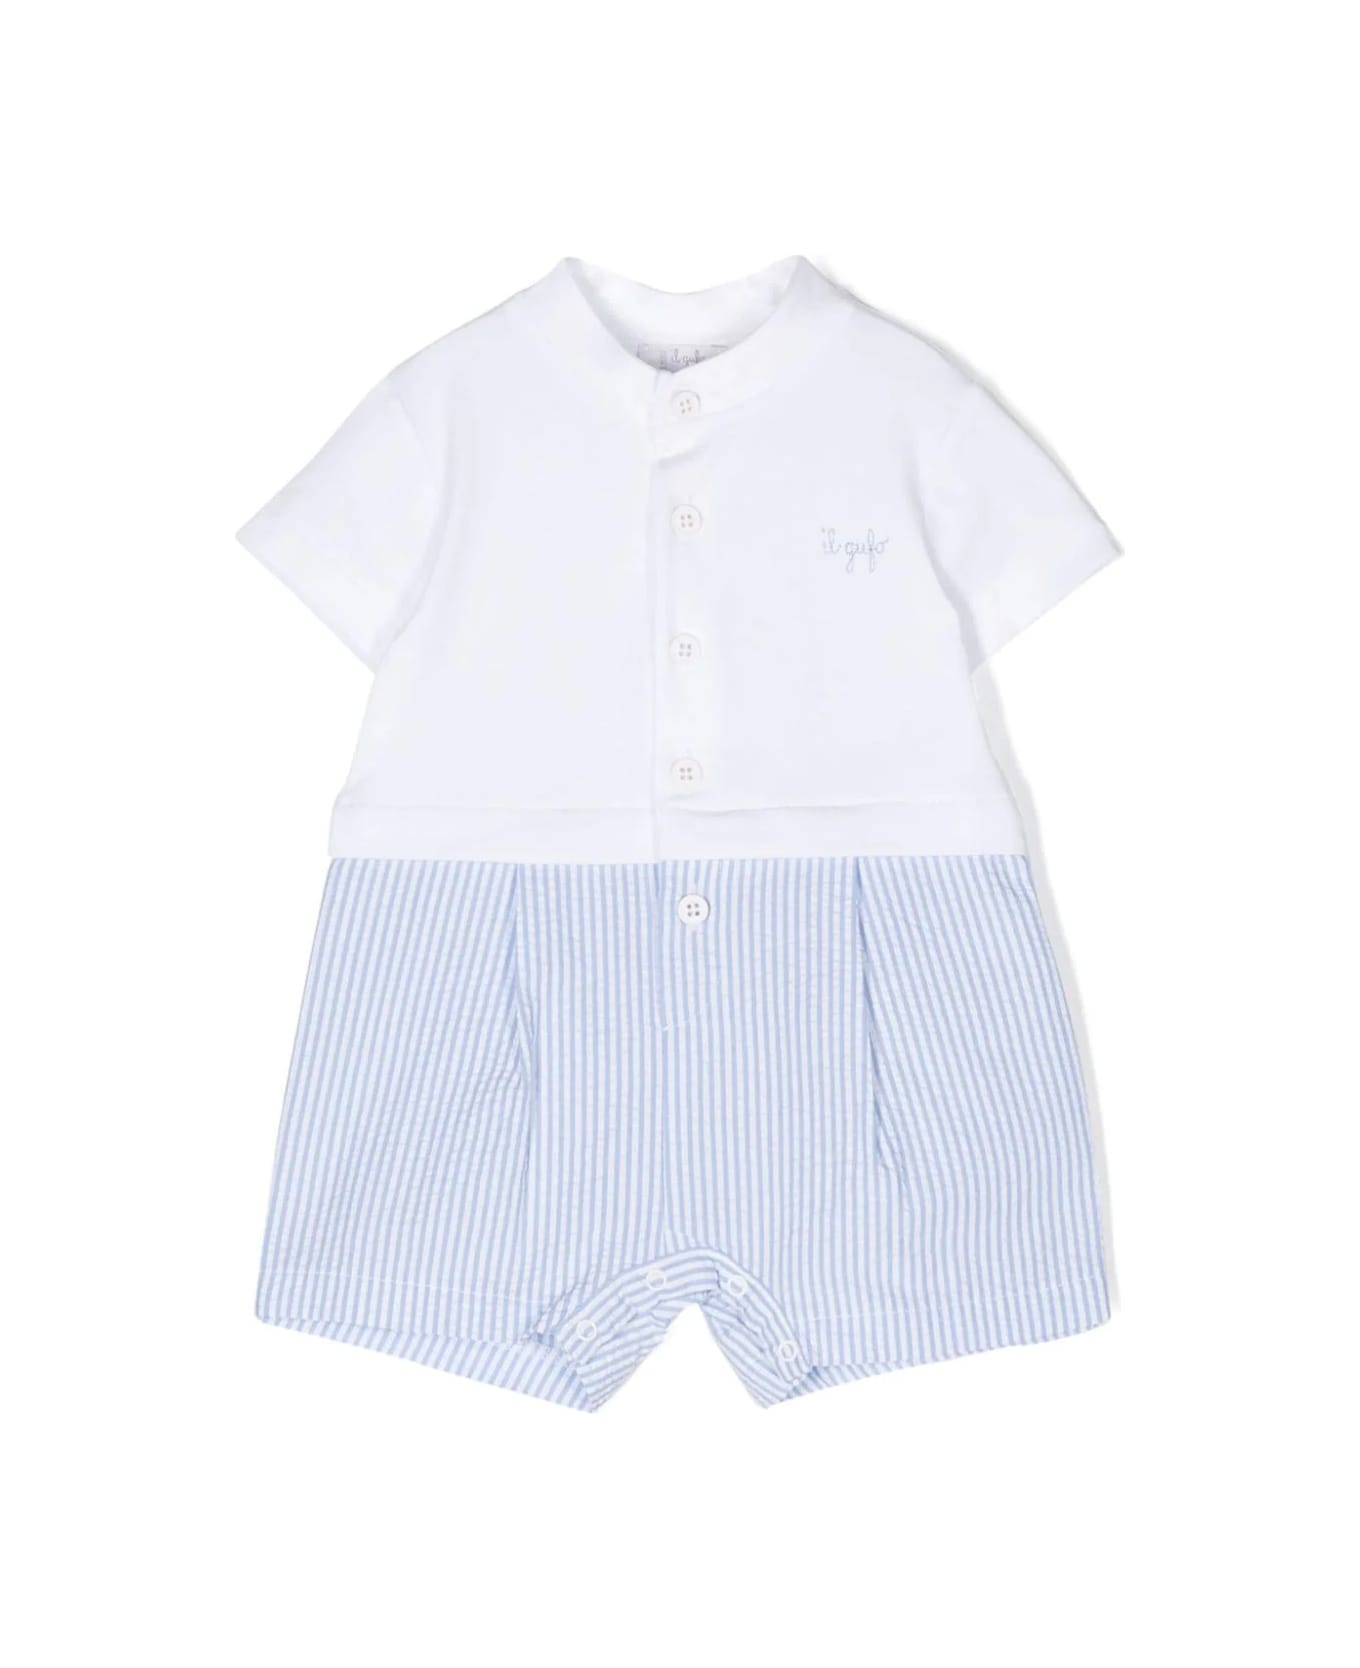 Il Gufo Light Blue And White Striped Seersucker Short Playsuit In Two Different Materials - Blue